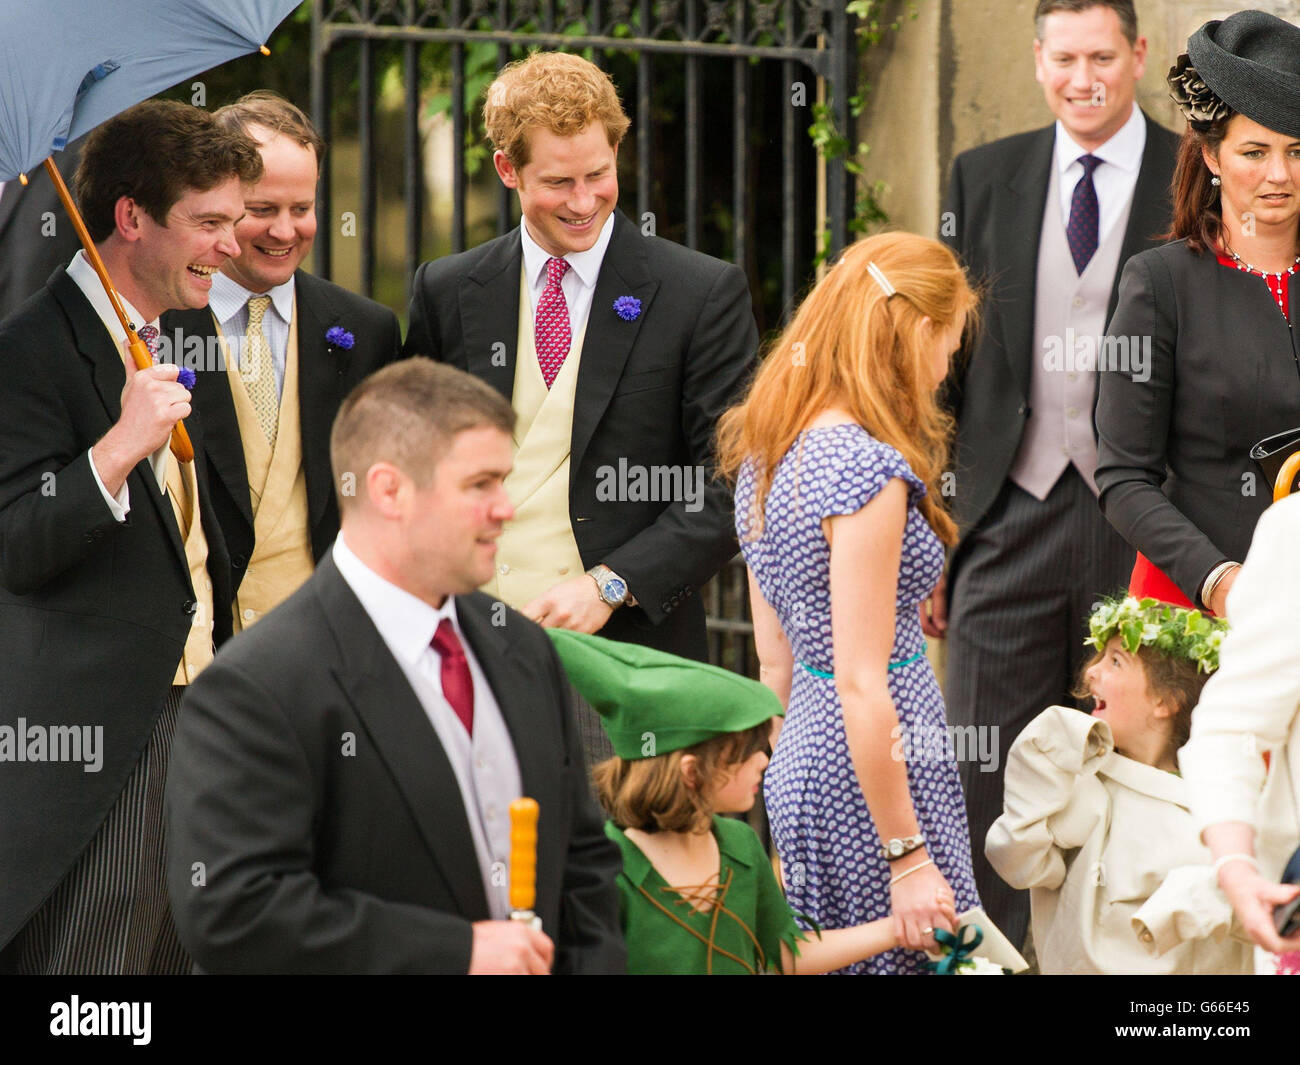 Prince Harry at the wedding of Lady Melissa Percy to Thomas van Straubenzee at St Michael's Parish Church in Alnwick. Stock Photo